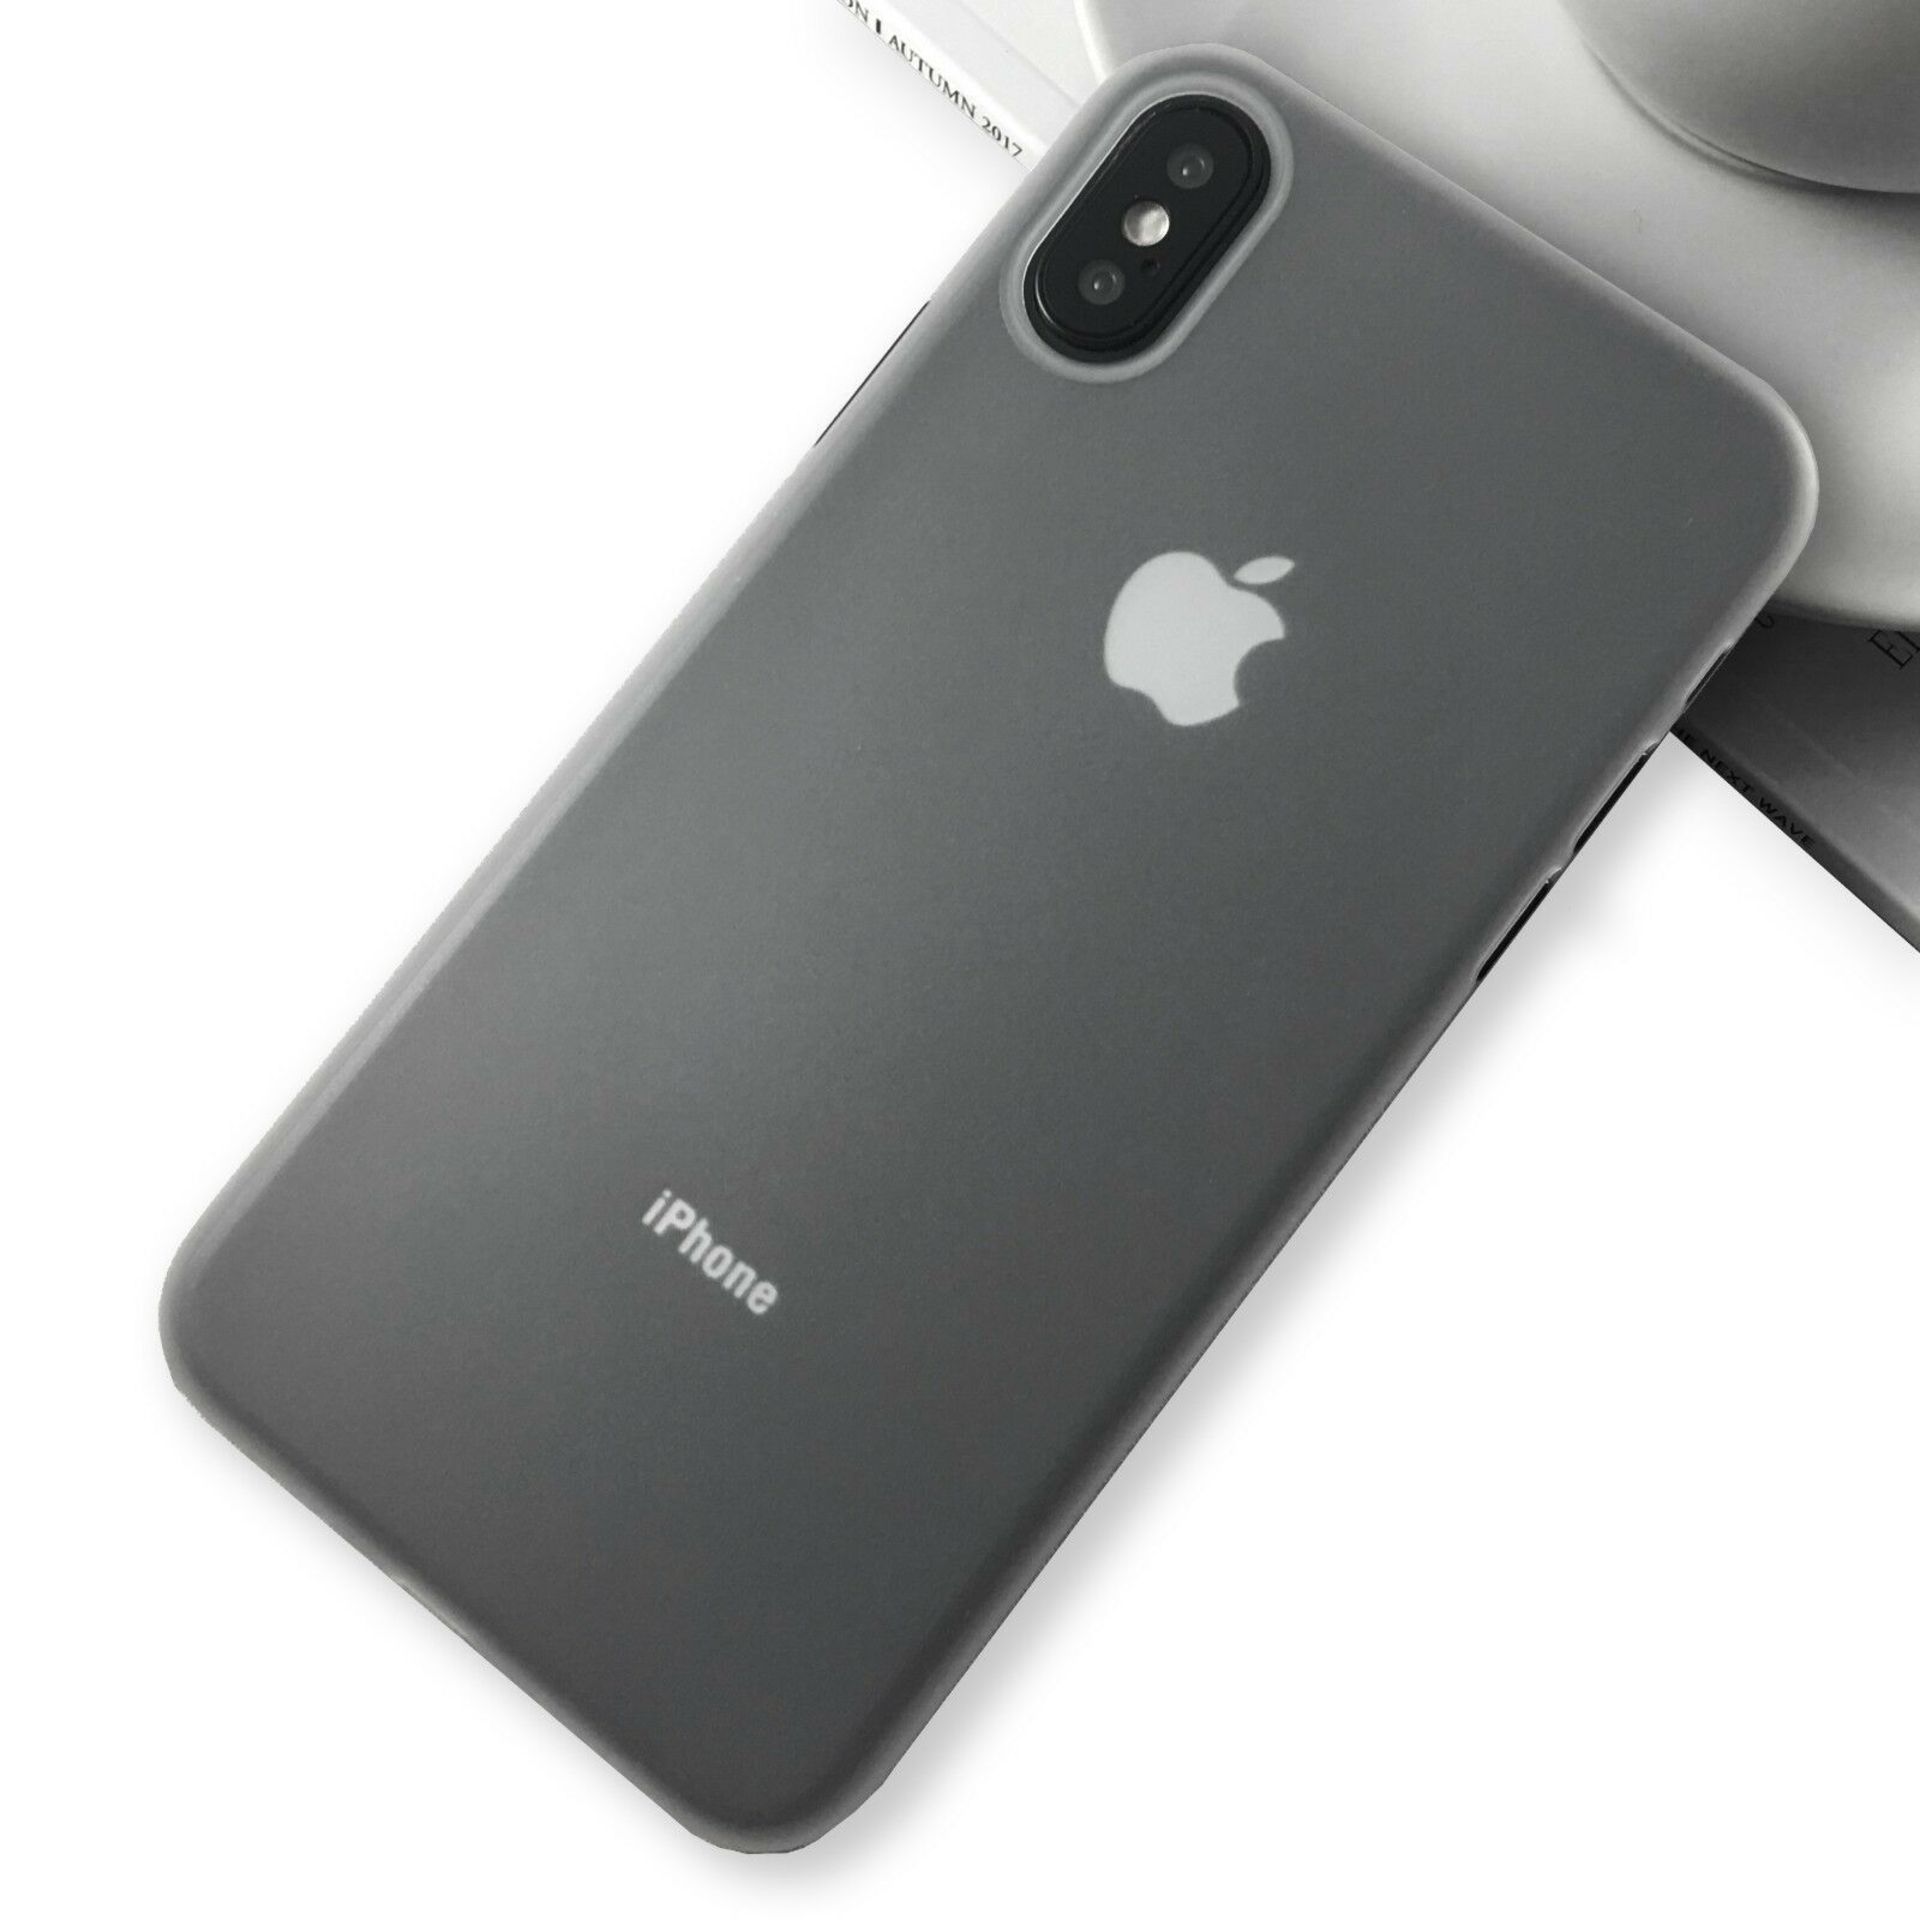 4 X ULTRA THIN 0.2MM PLASTIC CASE COVERS FOR IPHONE X/XS, CLEAR, LIGHT GREY AND DARK GREY *NO VAT*